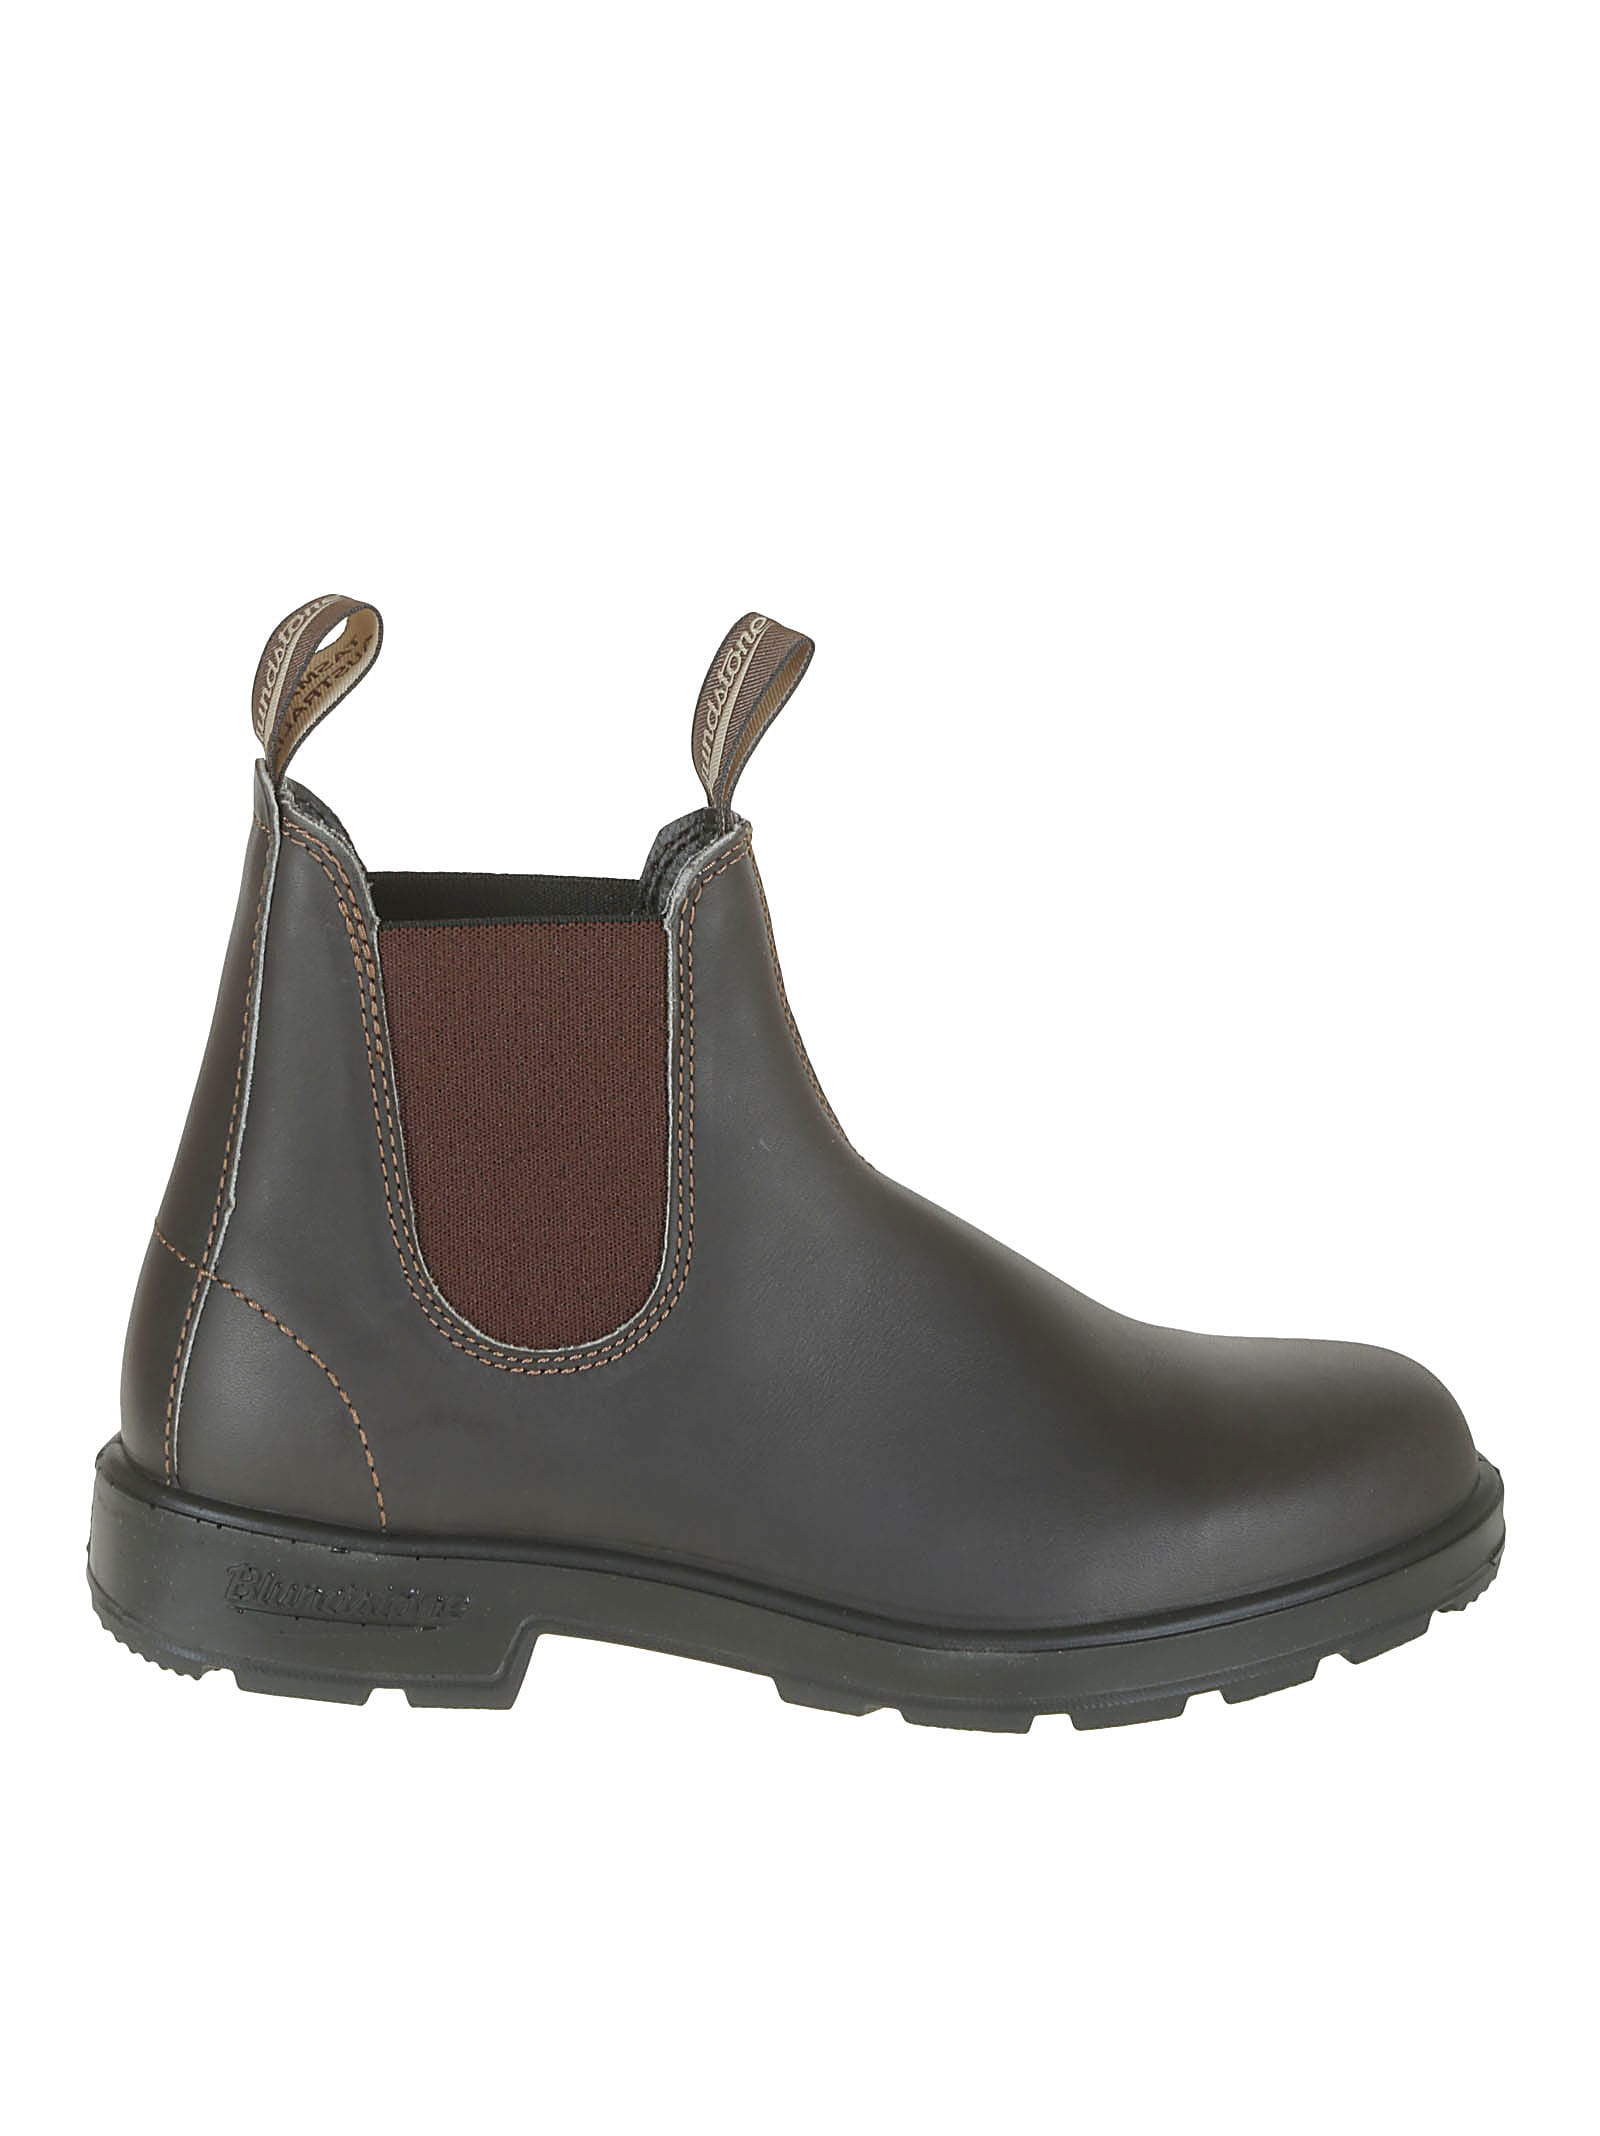 Blundstone 500 Stout Brown Leather